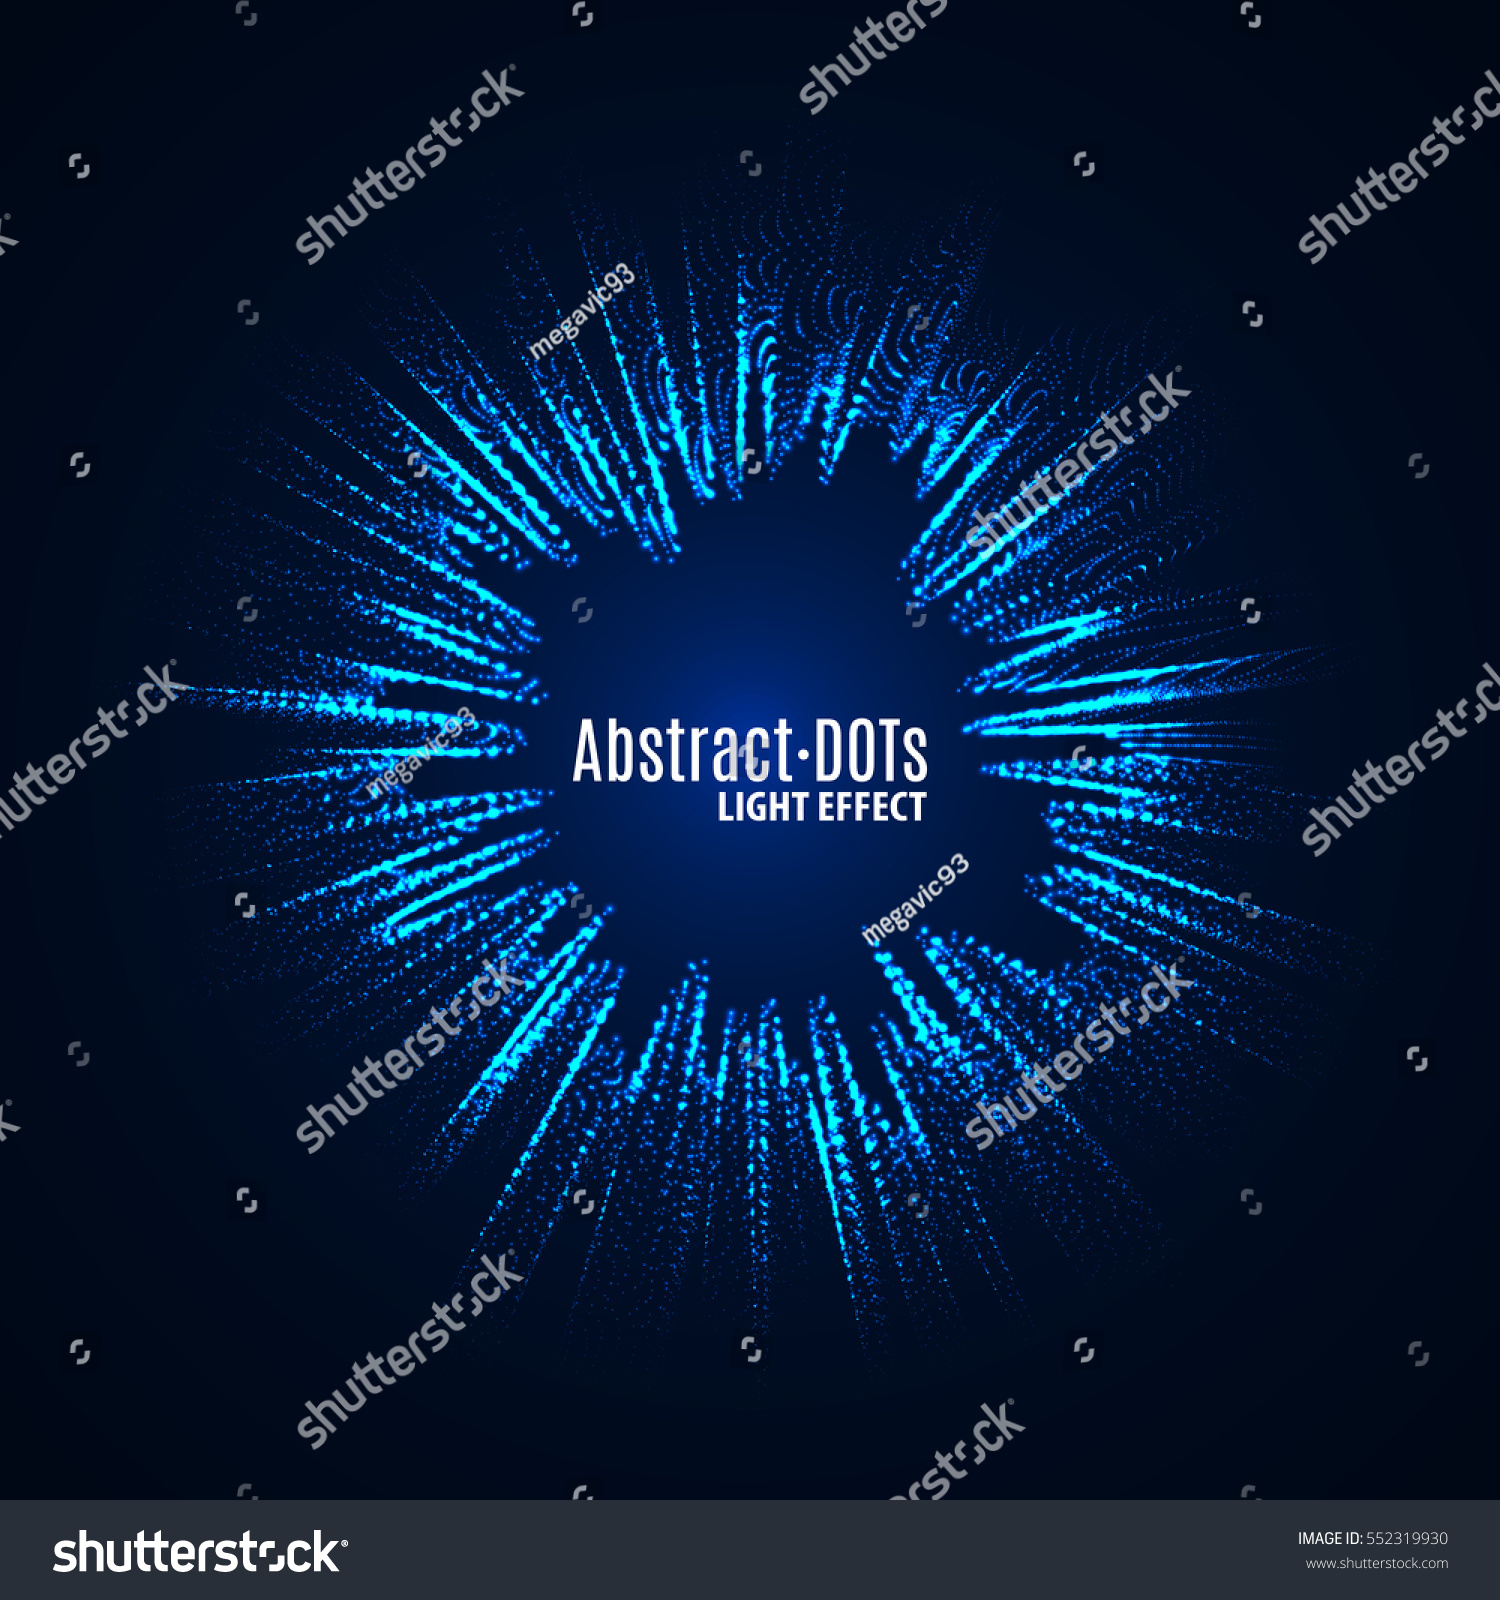 Minimalistic Abstract Light Dots Background Vector Stock Vector